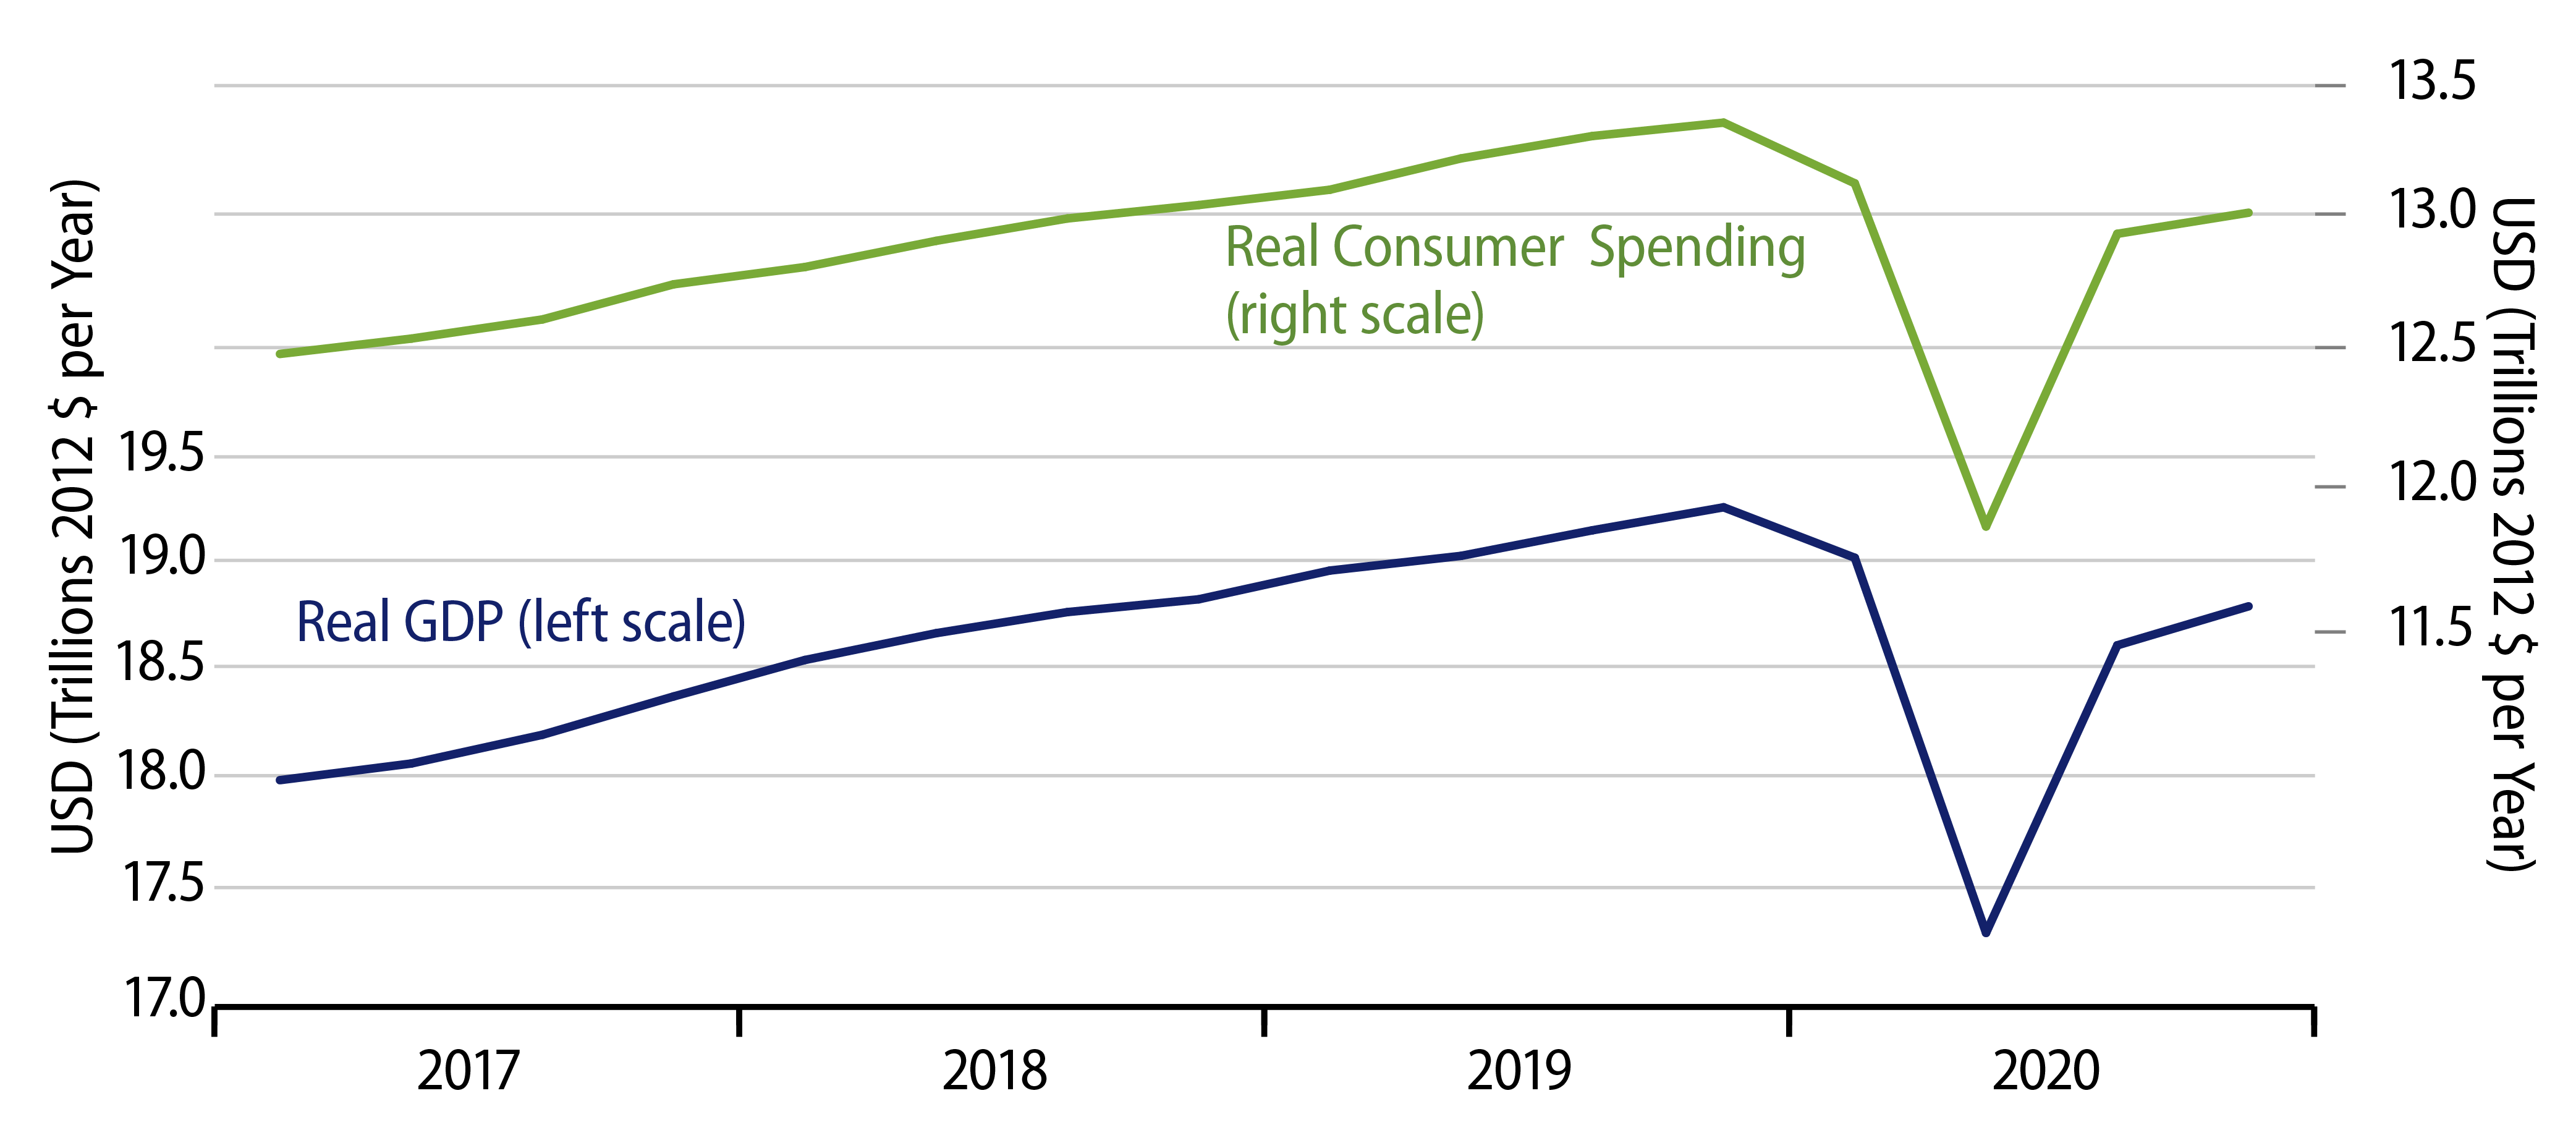 Explore Real GDP and Real Consumer Spending